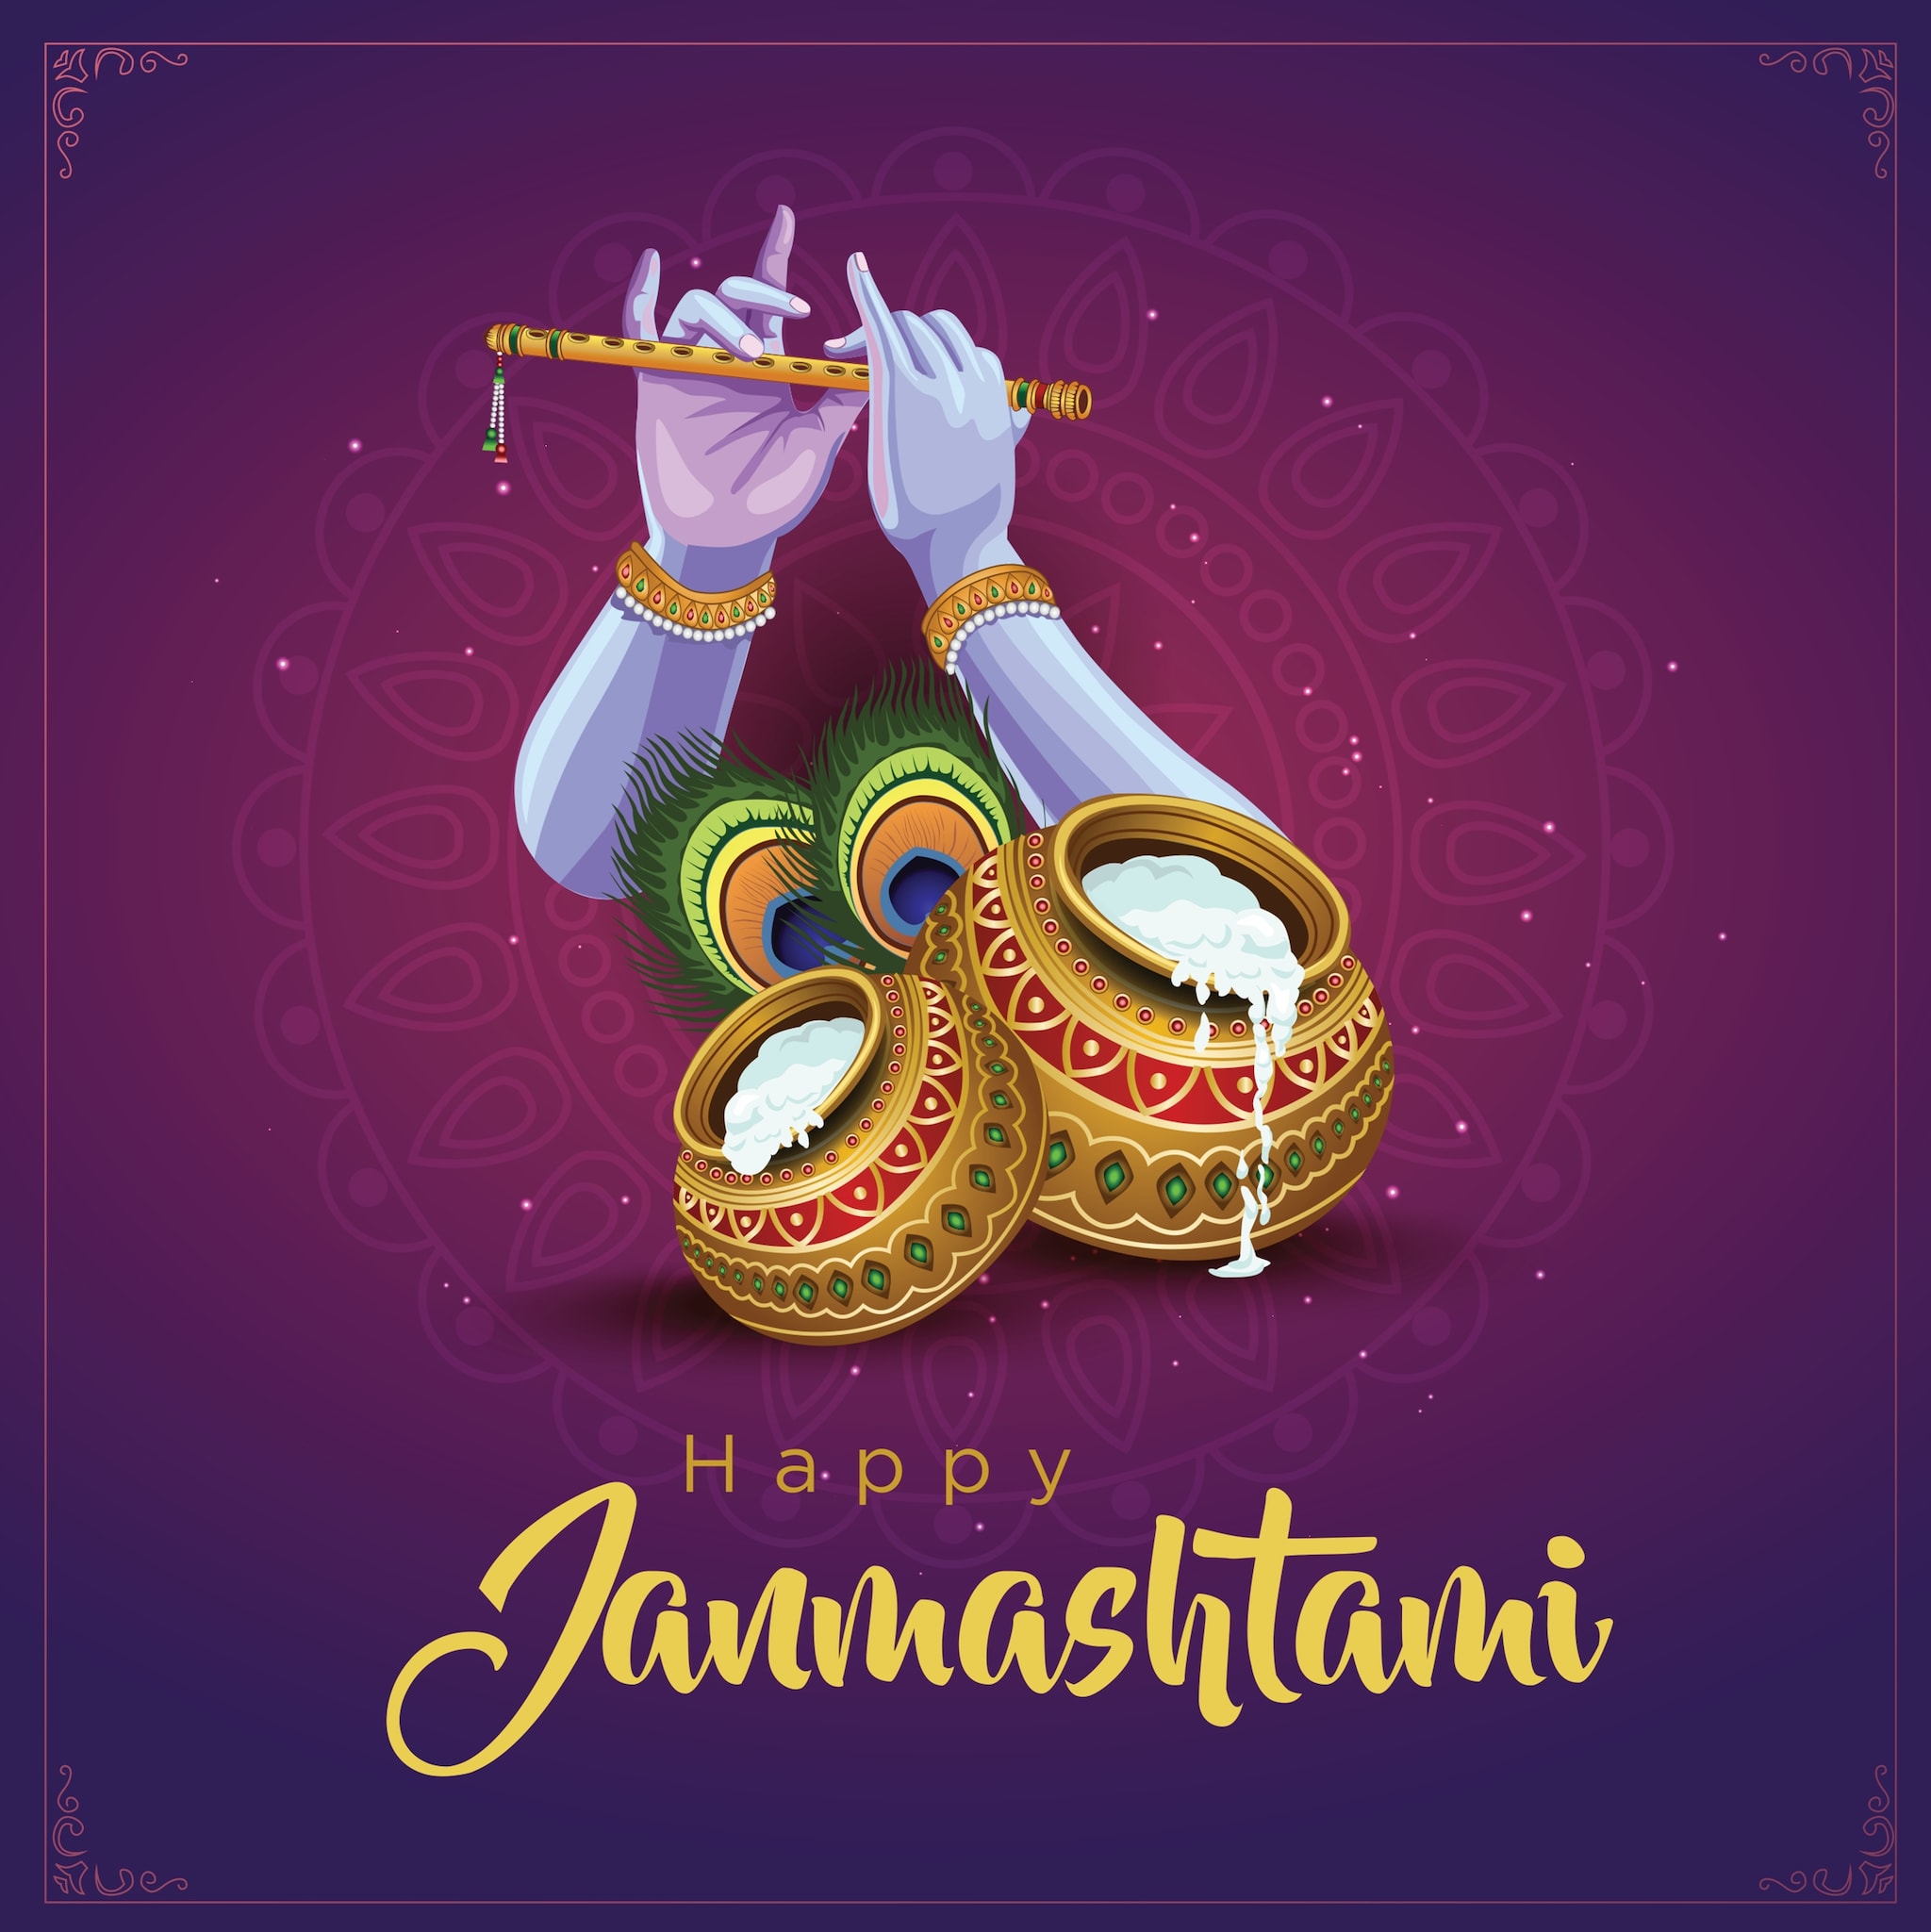 Happy Krishna Janmashtami 2022: Best Wishes, messages, quotes, greetings, SMS, WhatsApp and Facebook status to share with your family and friends on Gokulashtami. (Image: Shutterstock)  